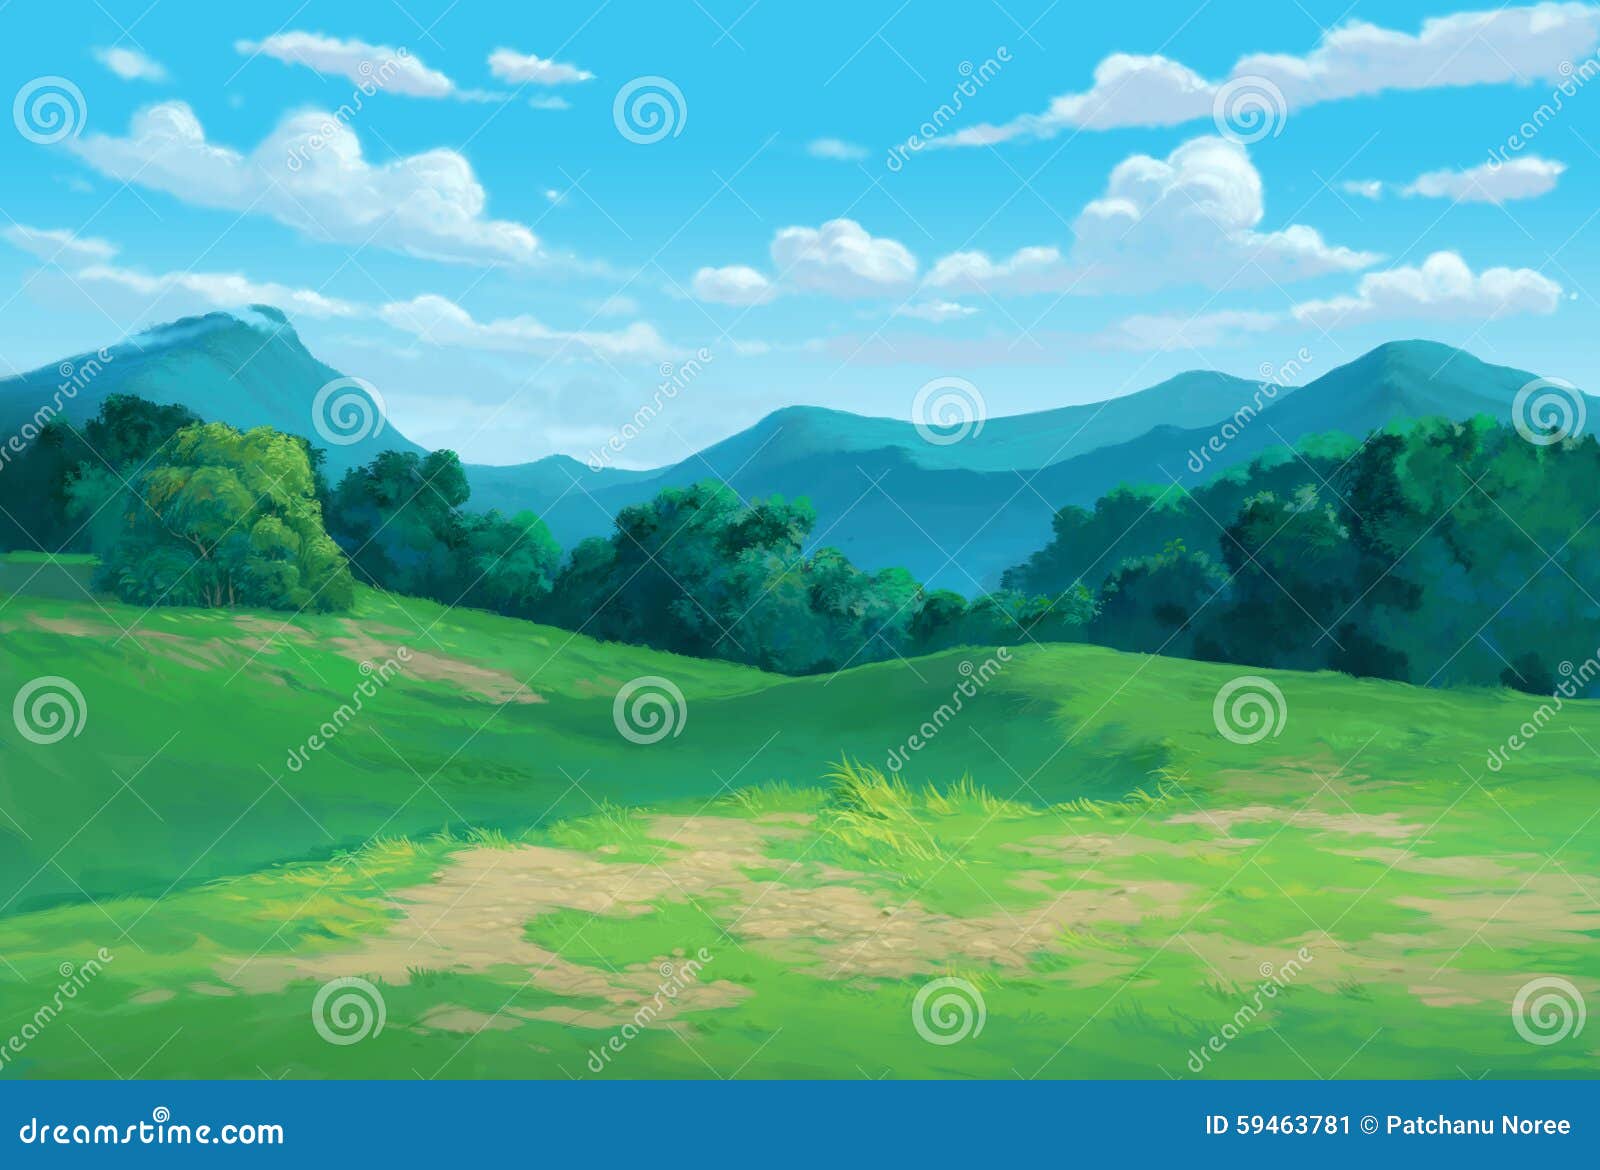 meadow background